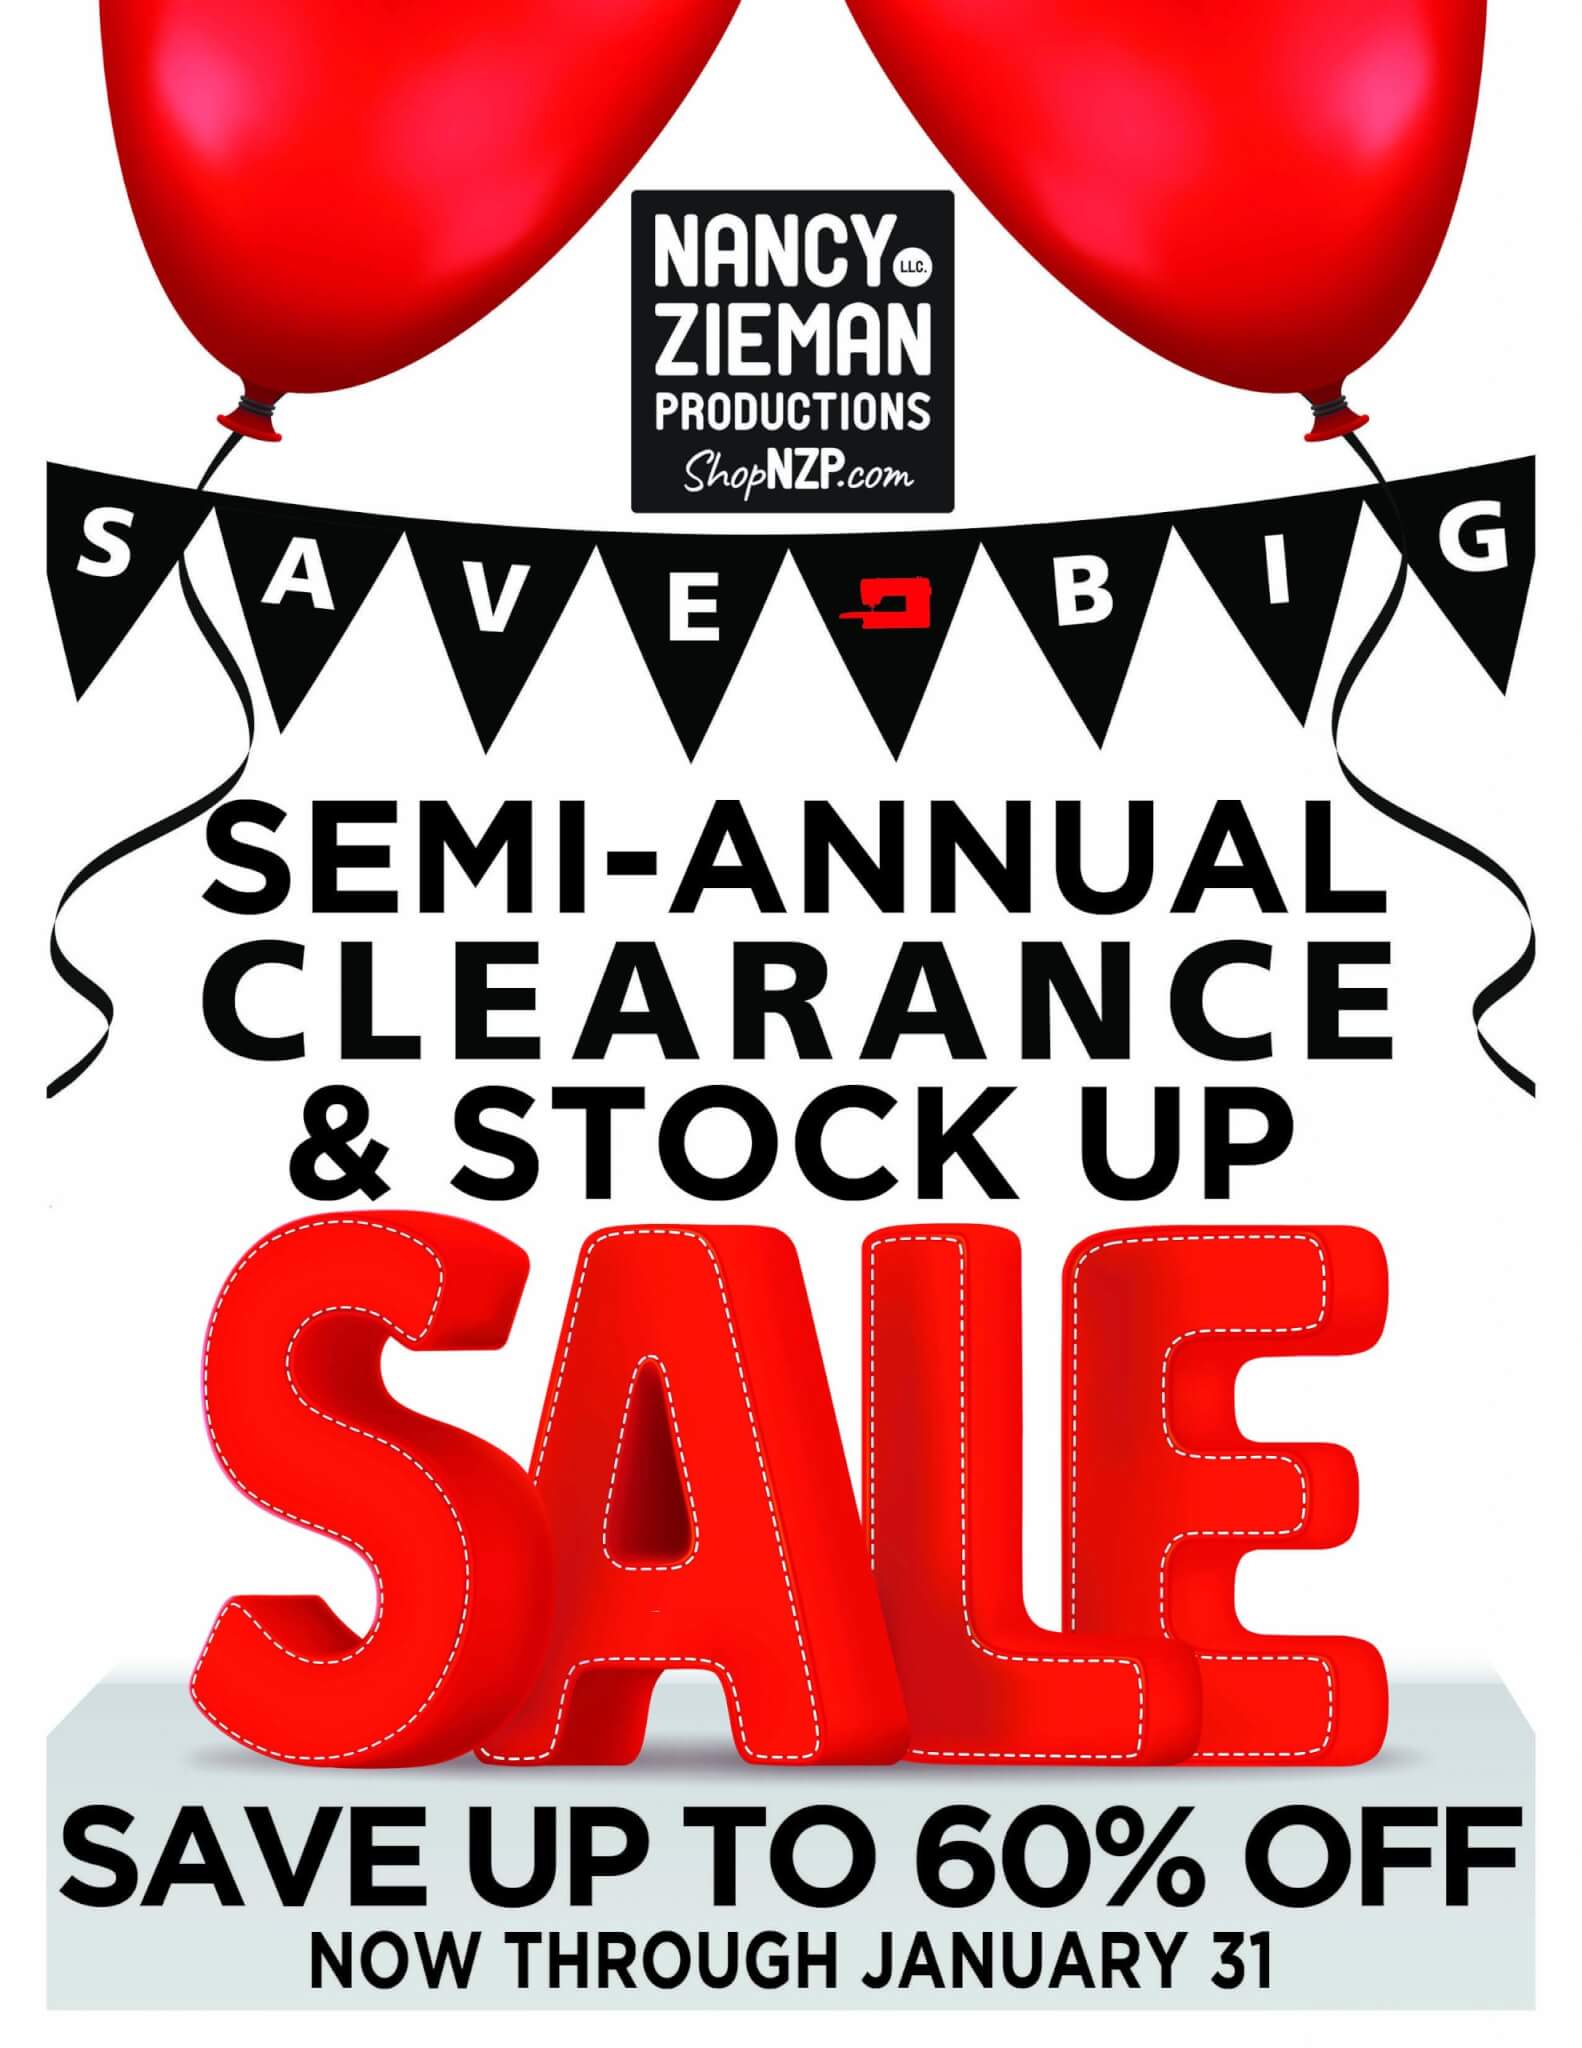 Semi-Annual Clearance & Stock Up Sale at Nancy Zieman Productions at ShopNZP.com